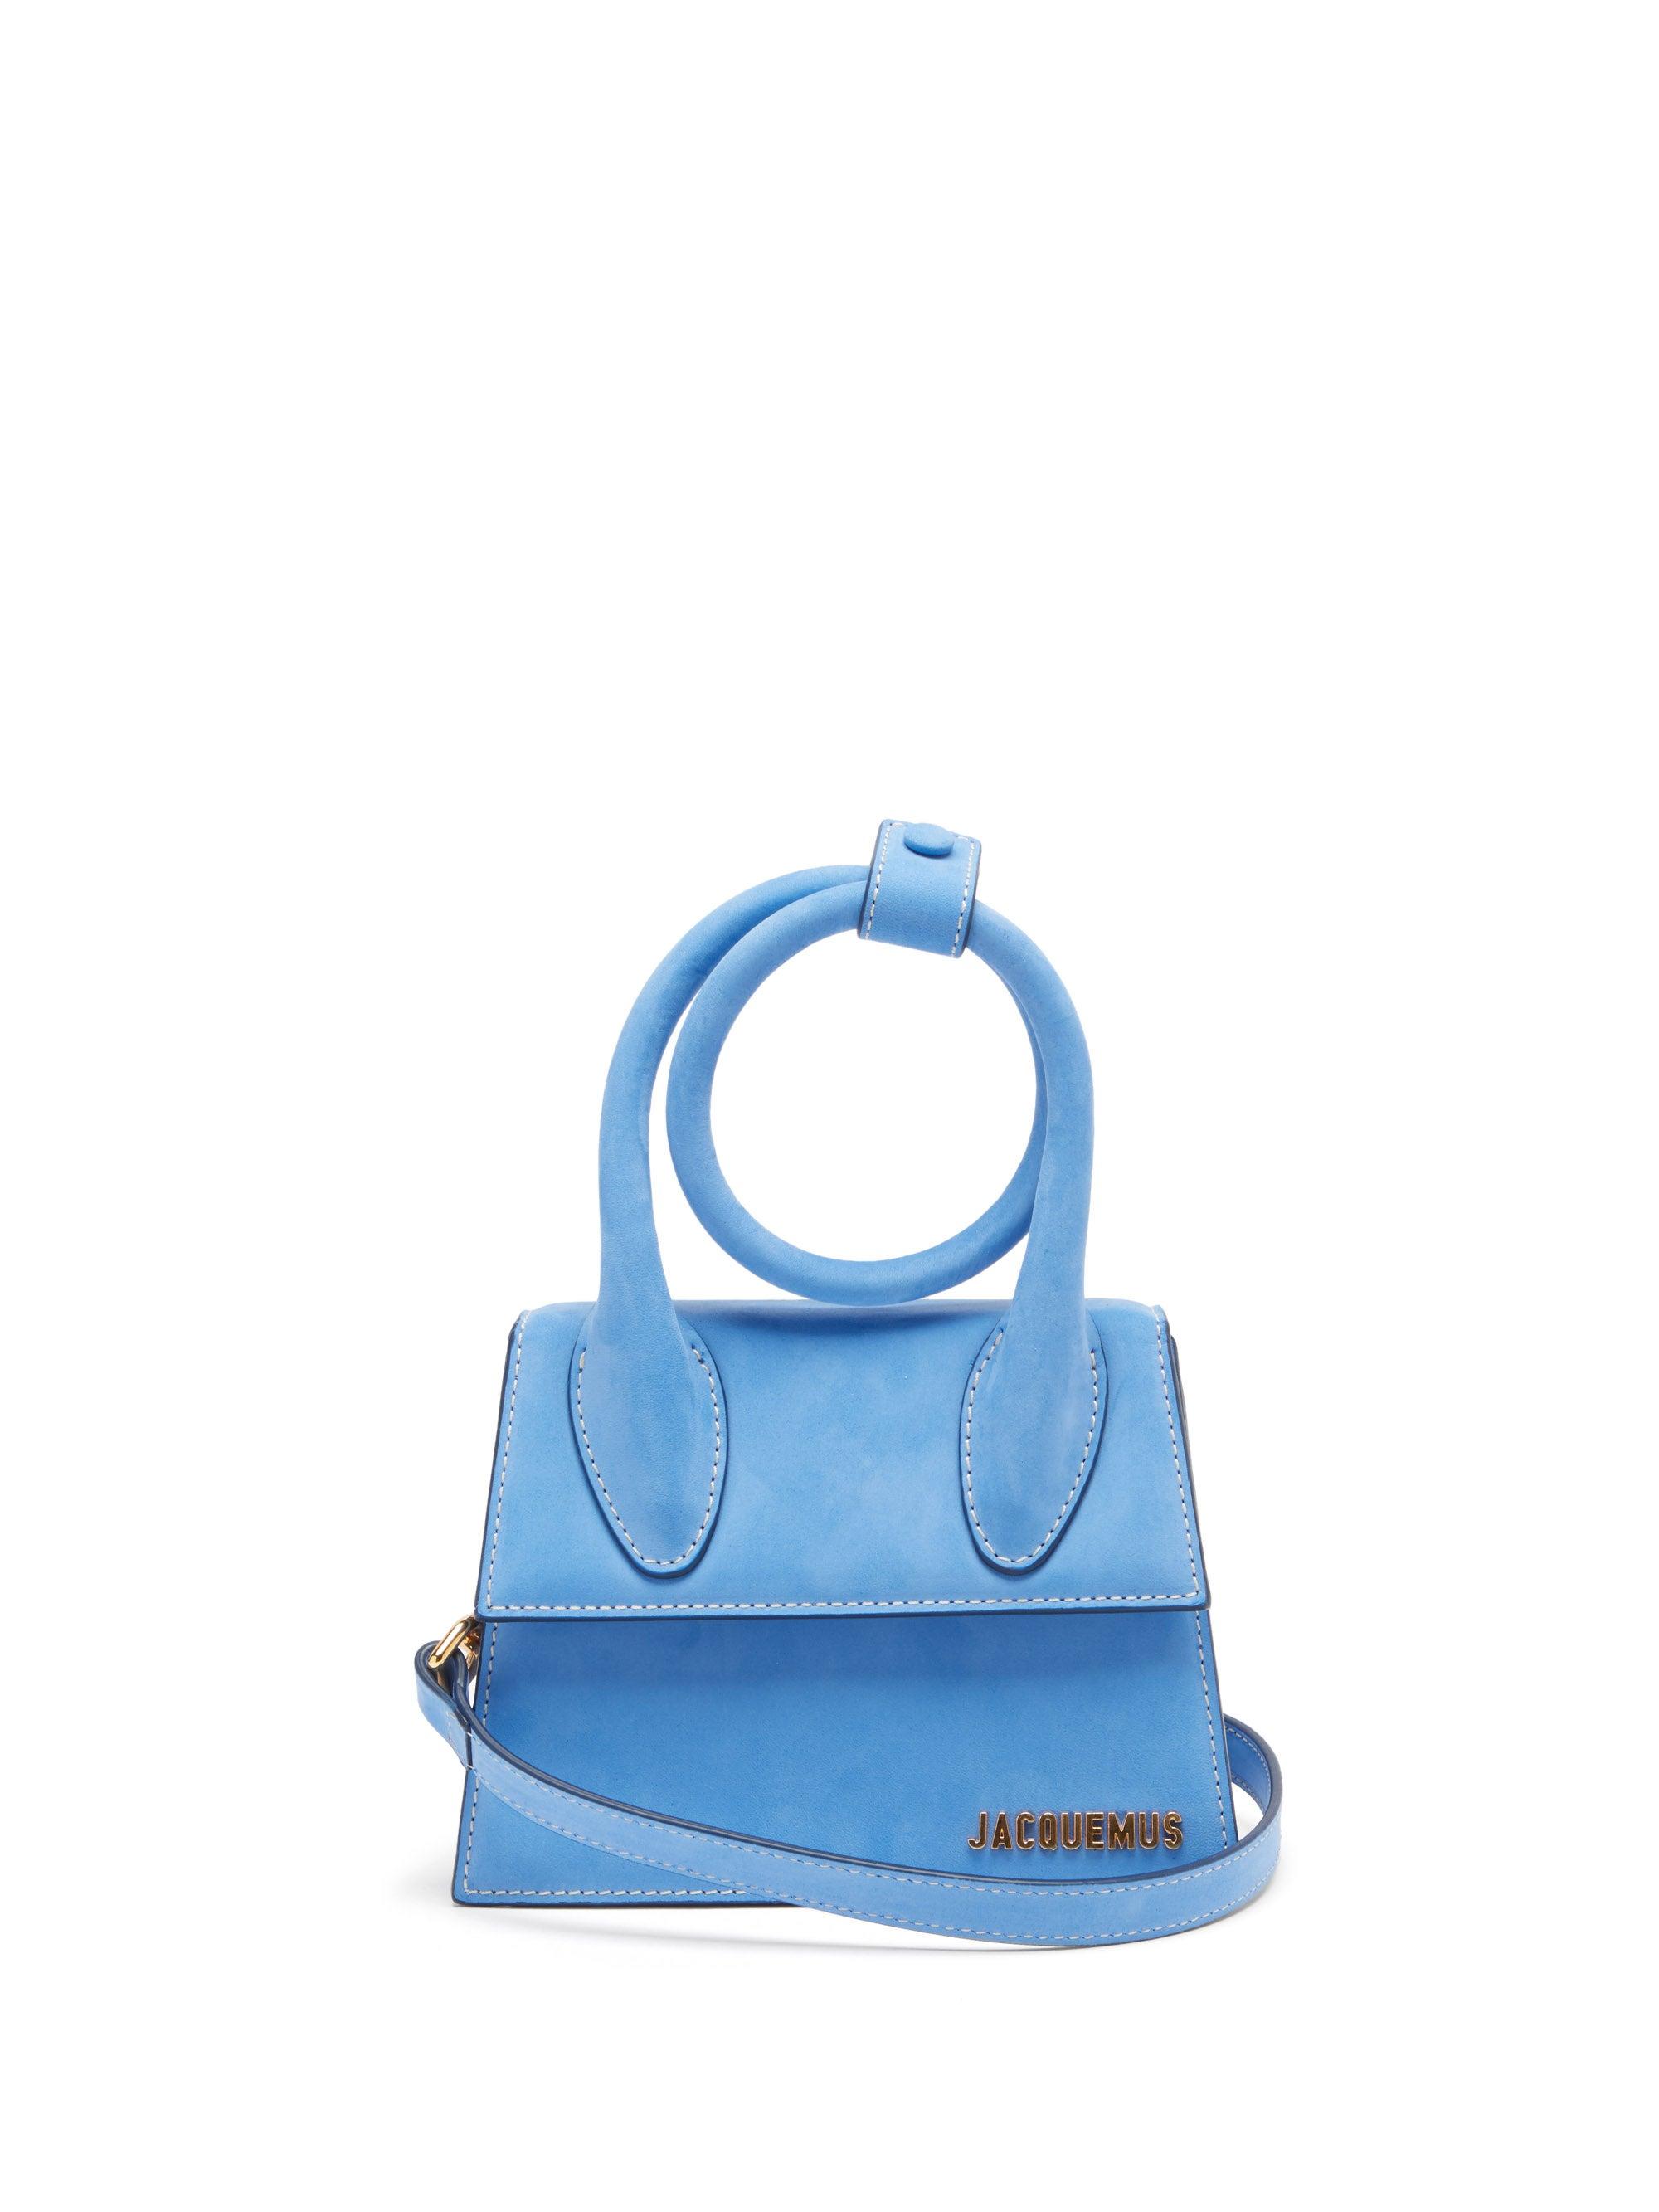 Jacquemus Chiquito Noeud Leather Cross-body Bag in Blue | Lyst